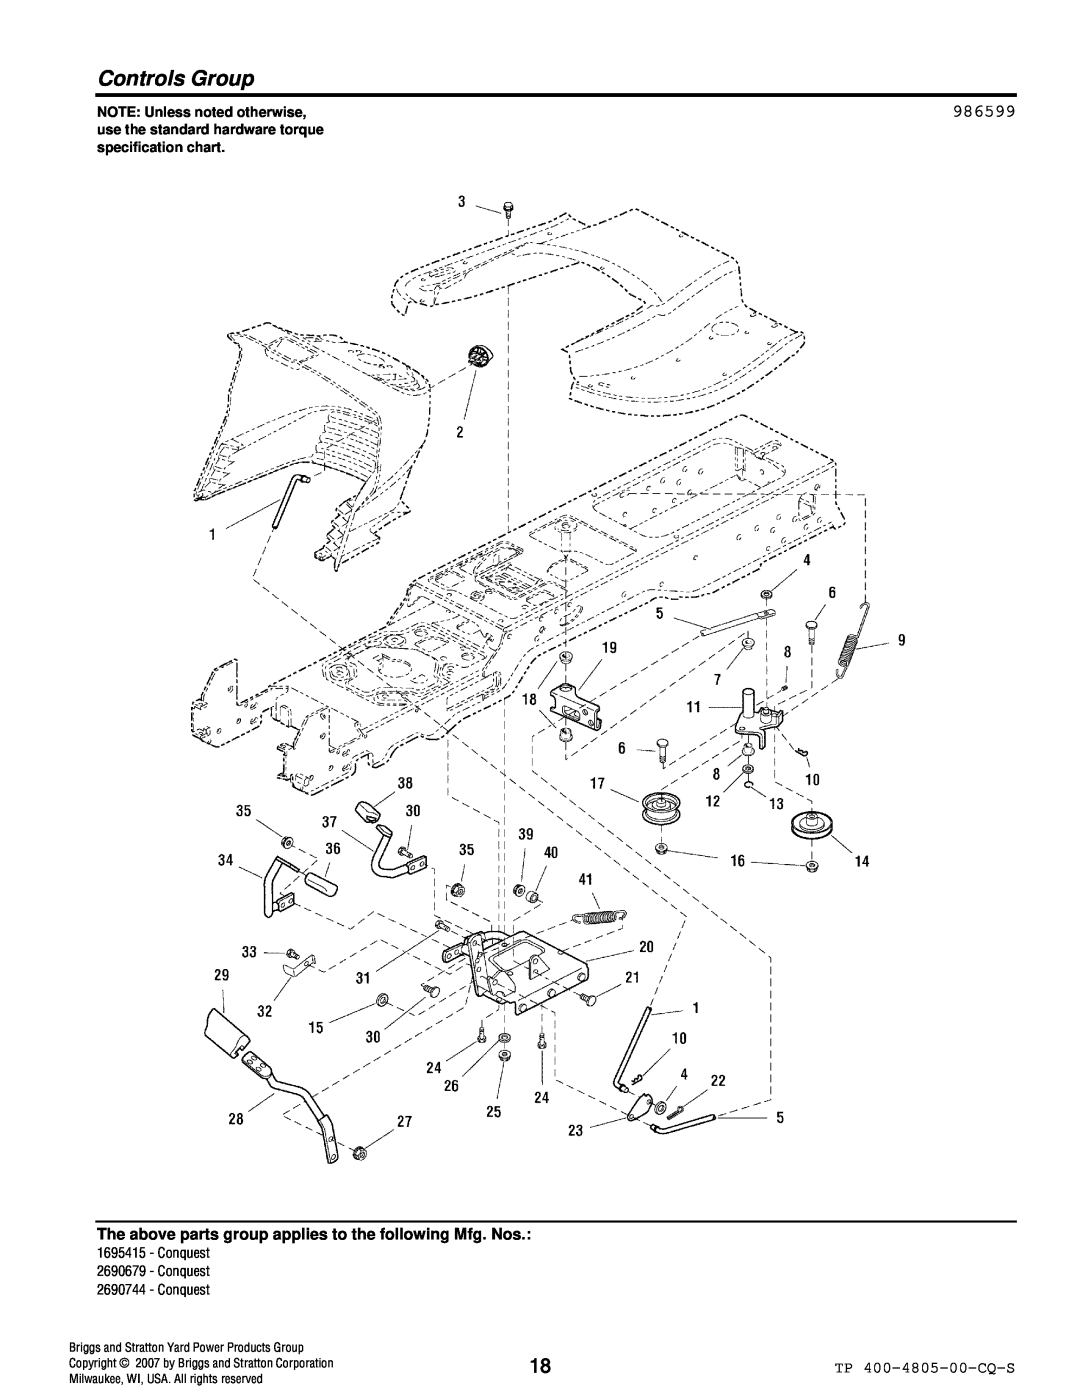 Simplicity 4WD Series Controls Group, 986599, NOTE: Unless noted otherwise, Briggs and Stratton Yard Power Products Group 